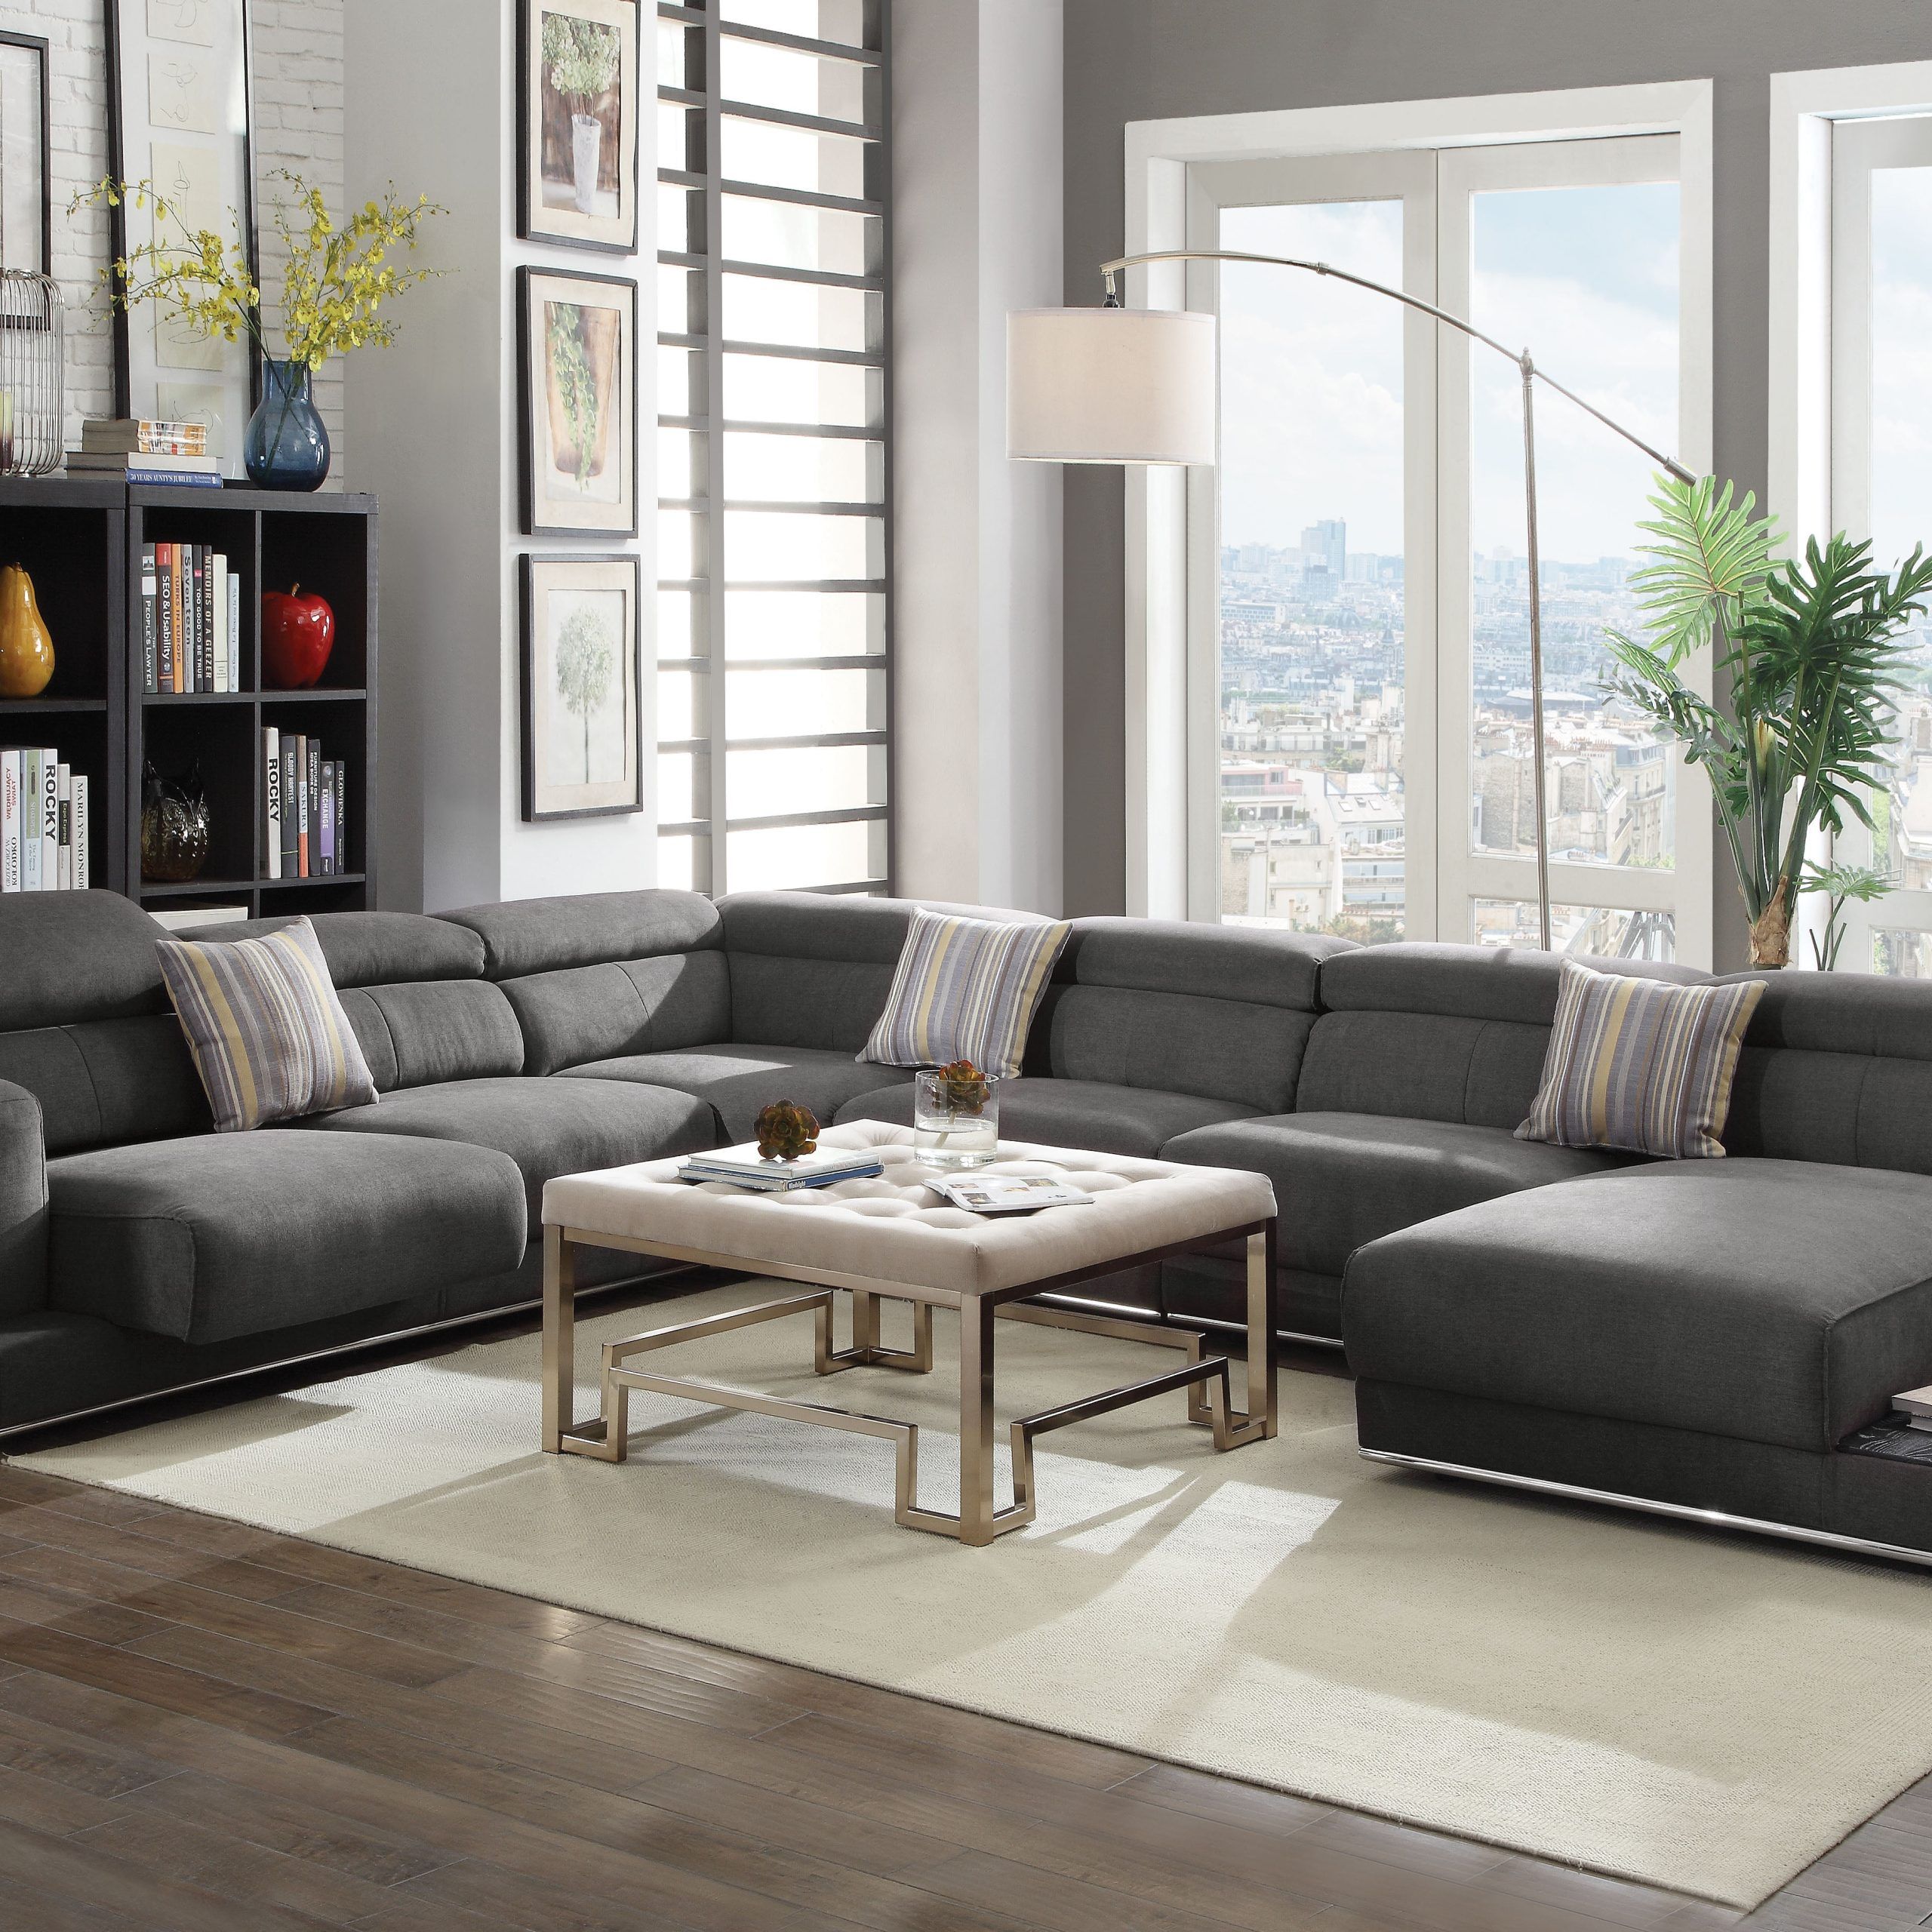 Acme Alwin Sectional Sofa In Dark Gray Fabric Upholstery – Walmart Within Sofas In Dark Grey (View 7 of 20)